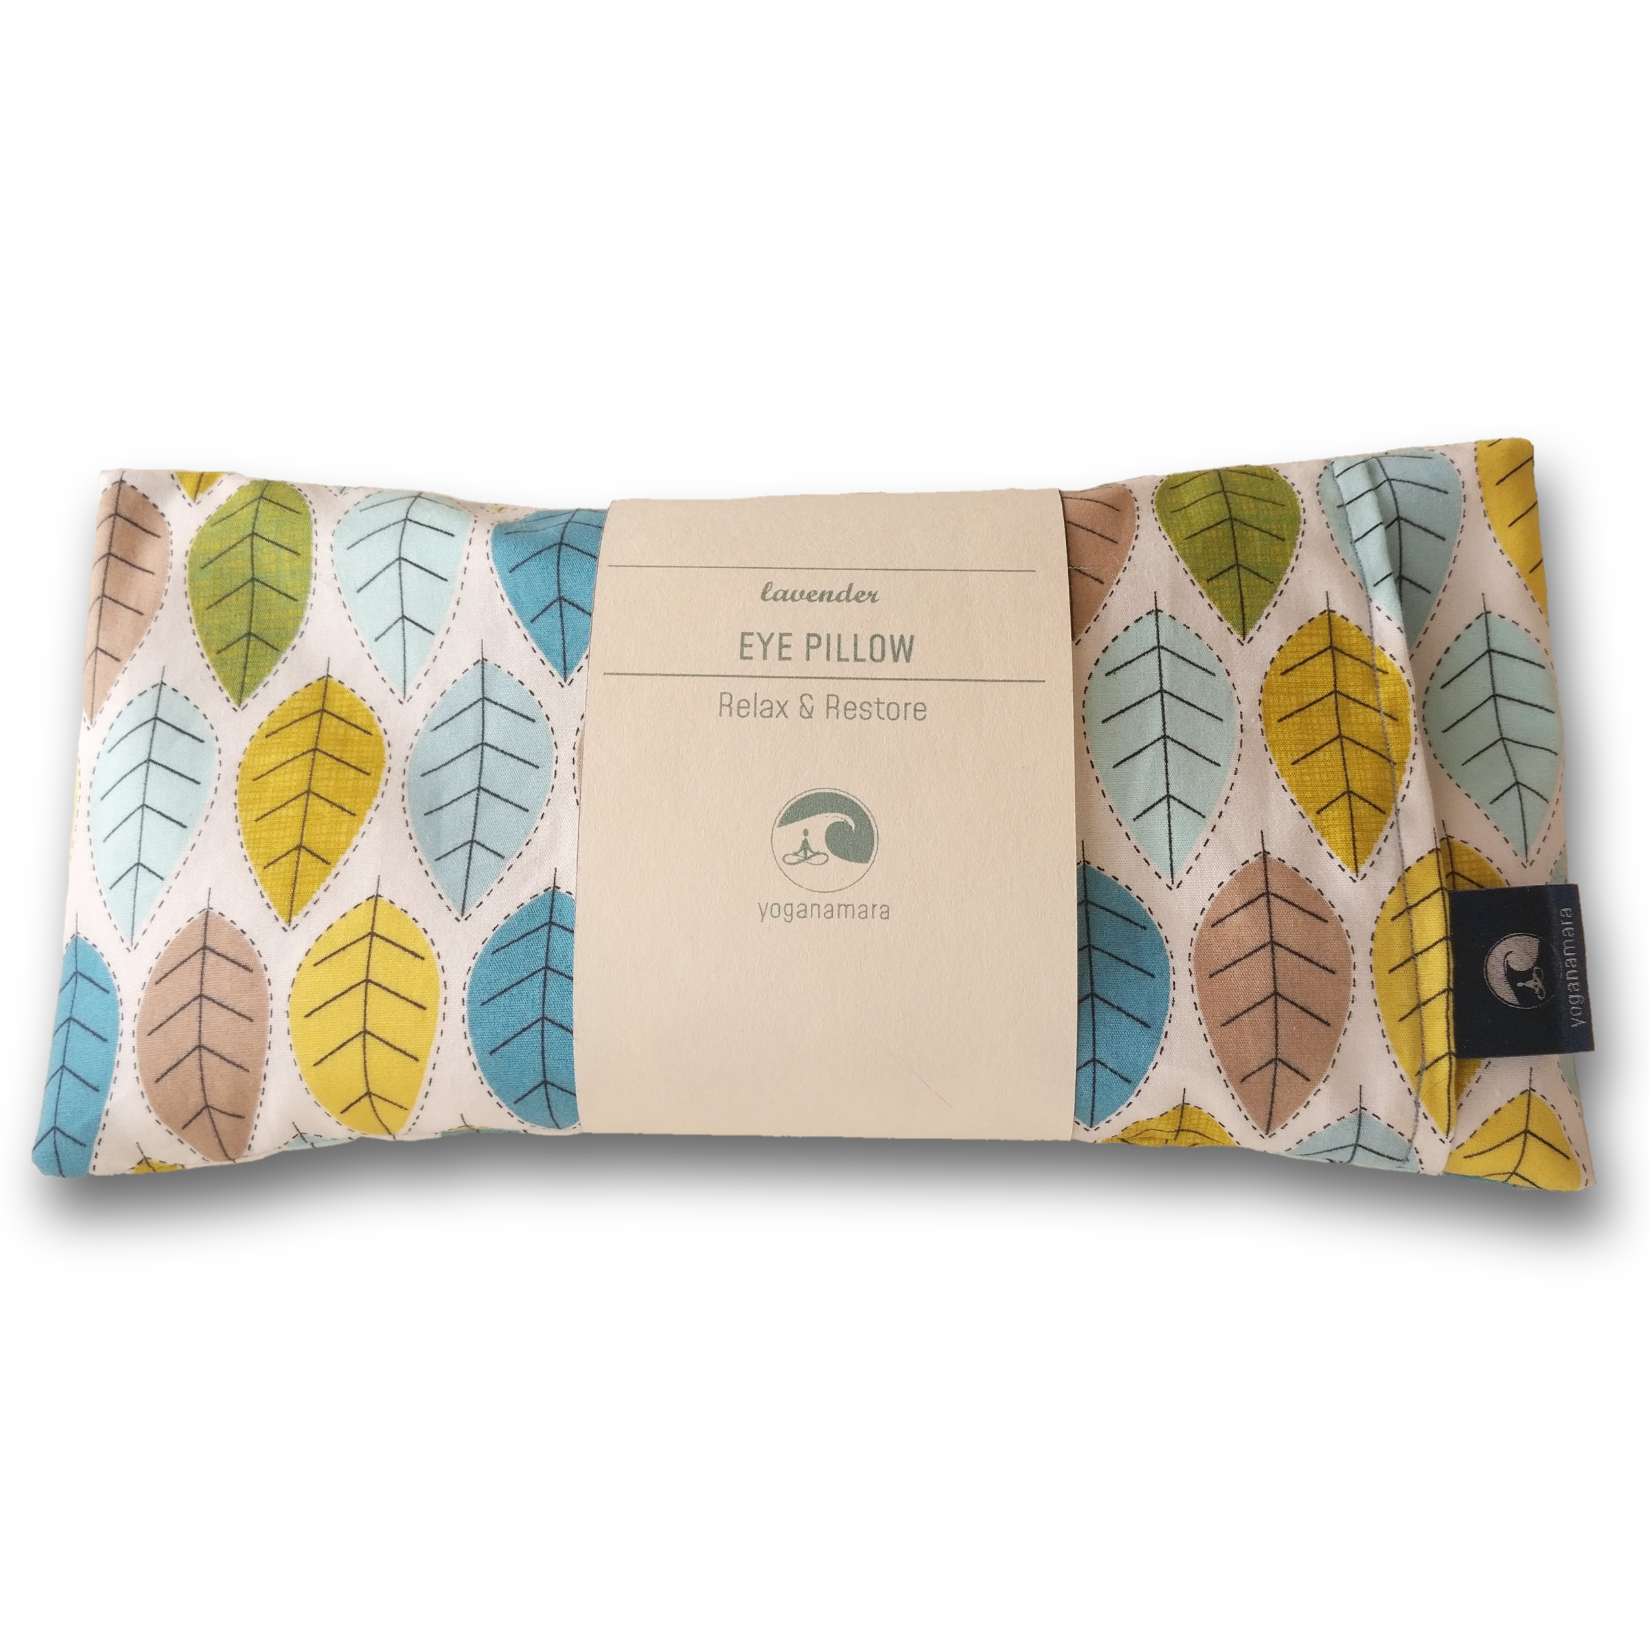 Eye pillow with lavender and flaxseed